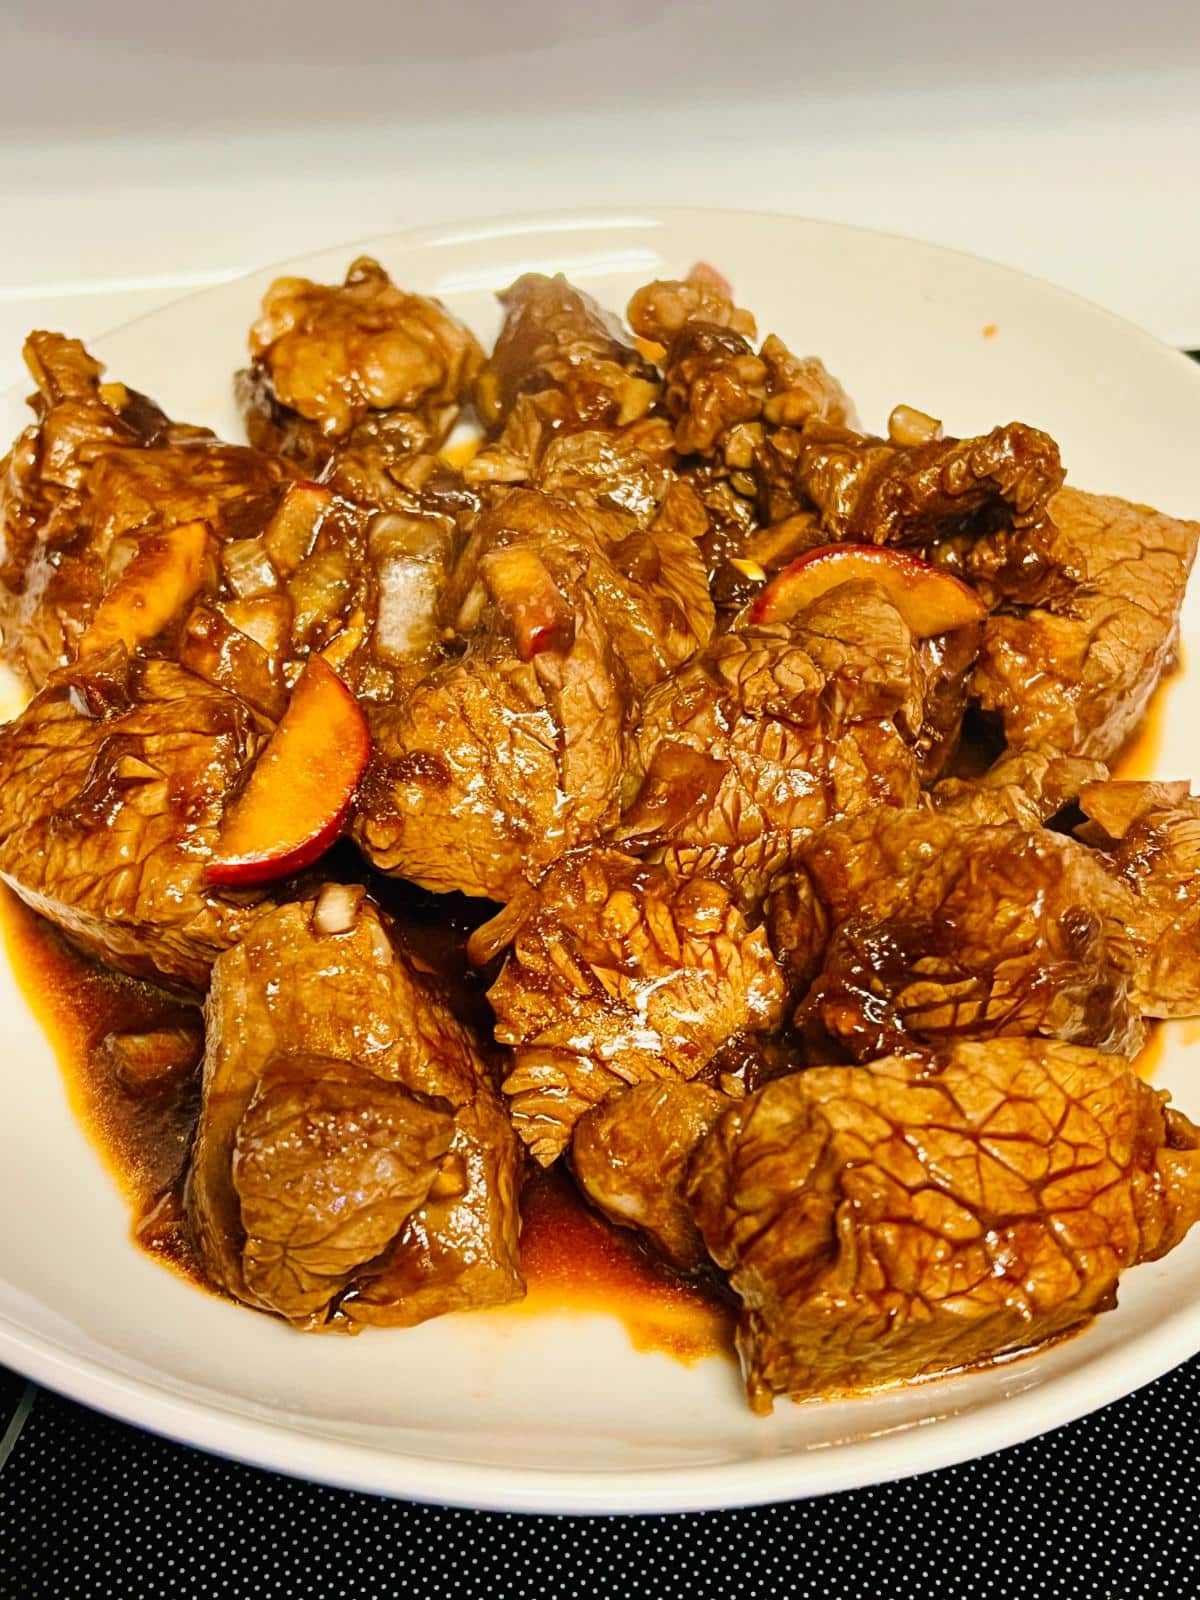 A plate of cooked marinated beef.